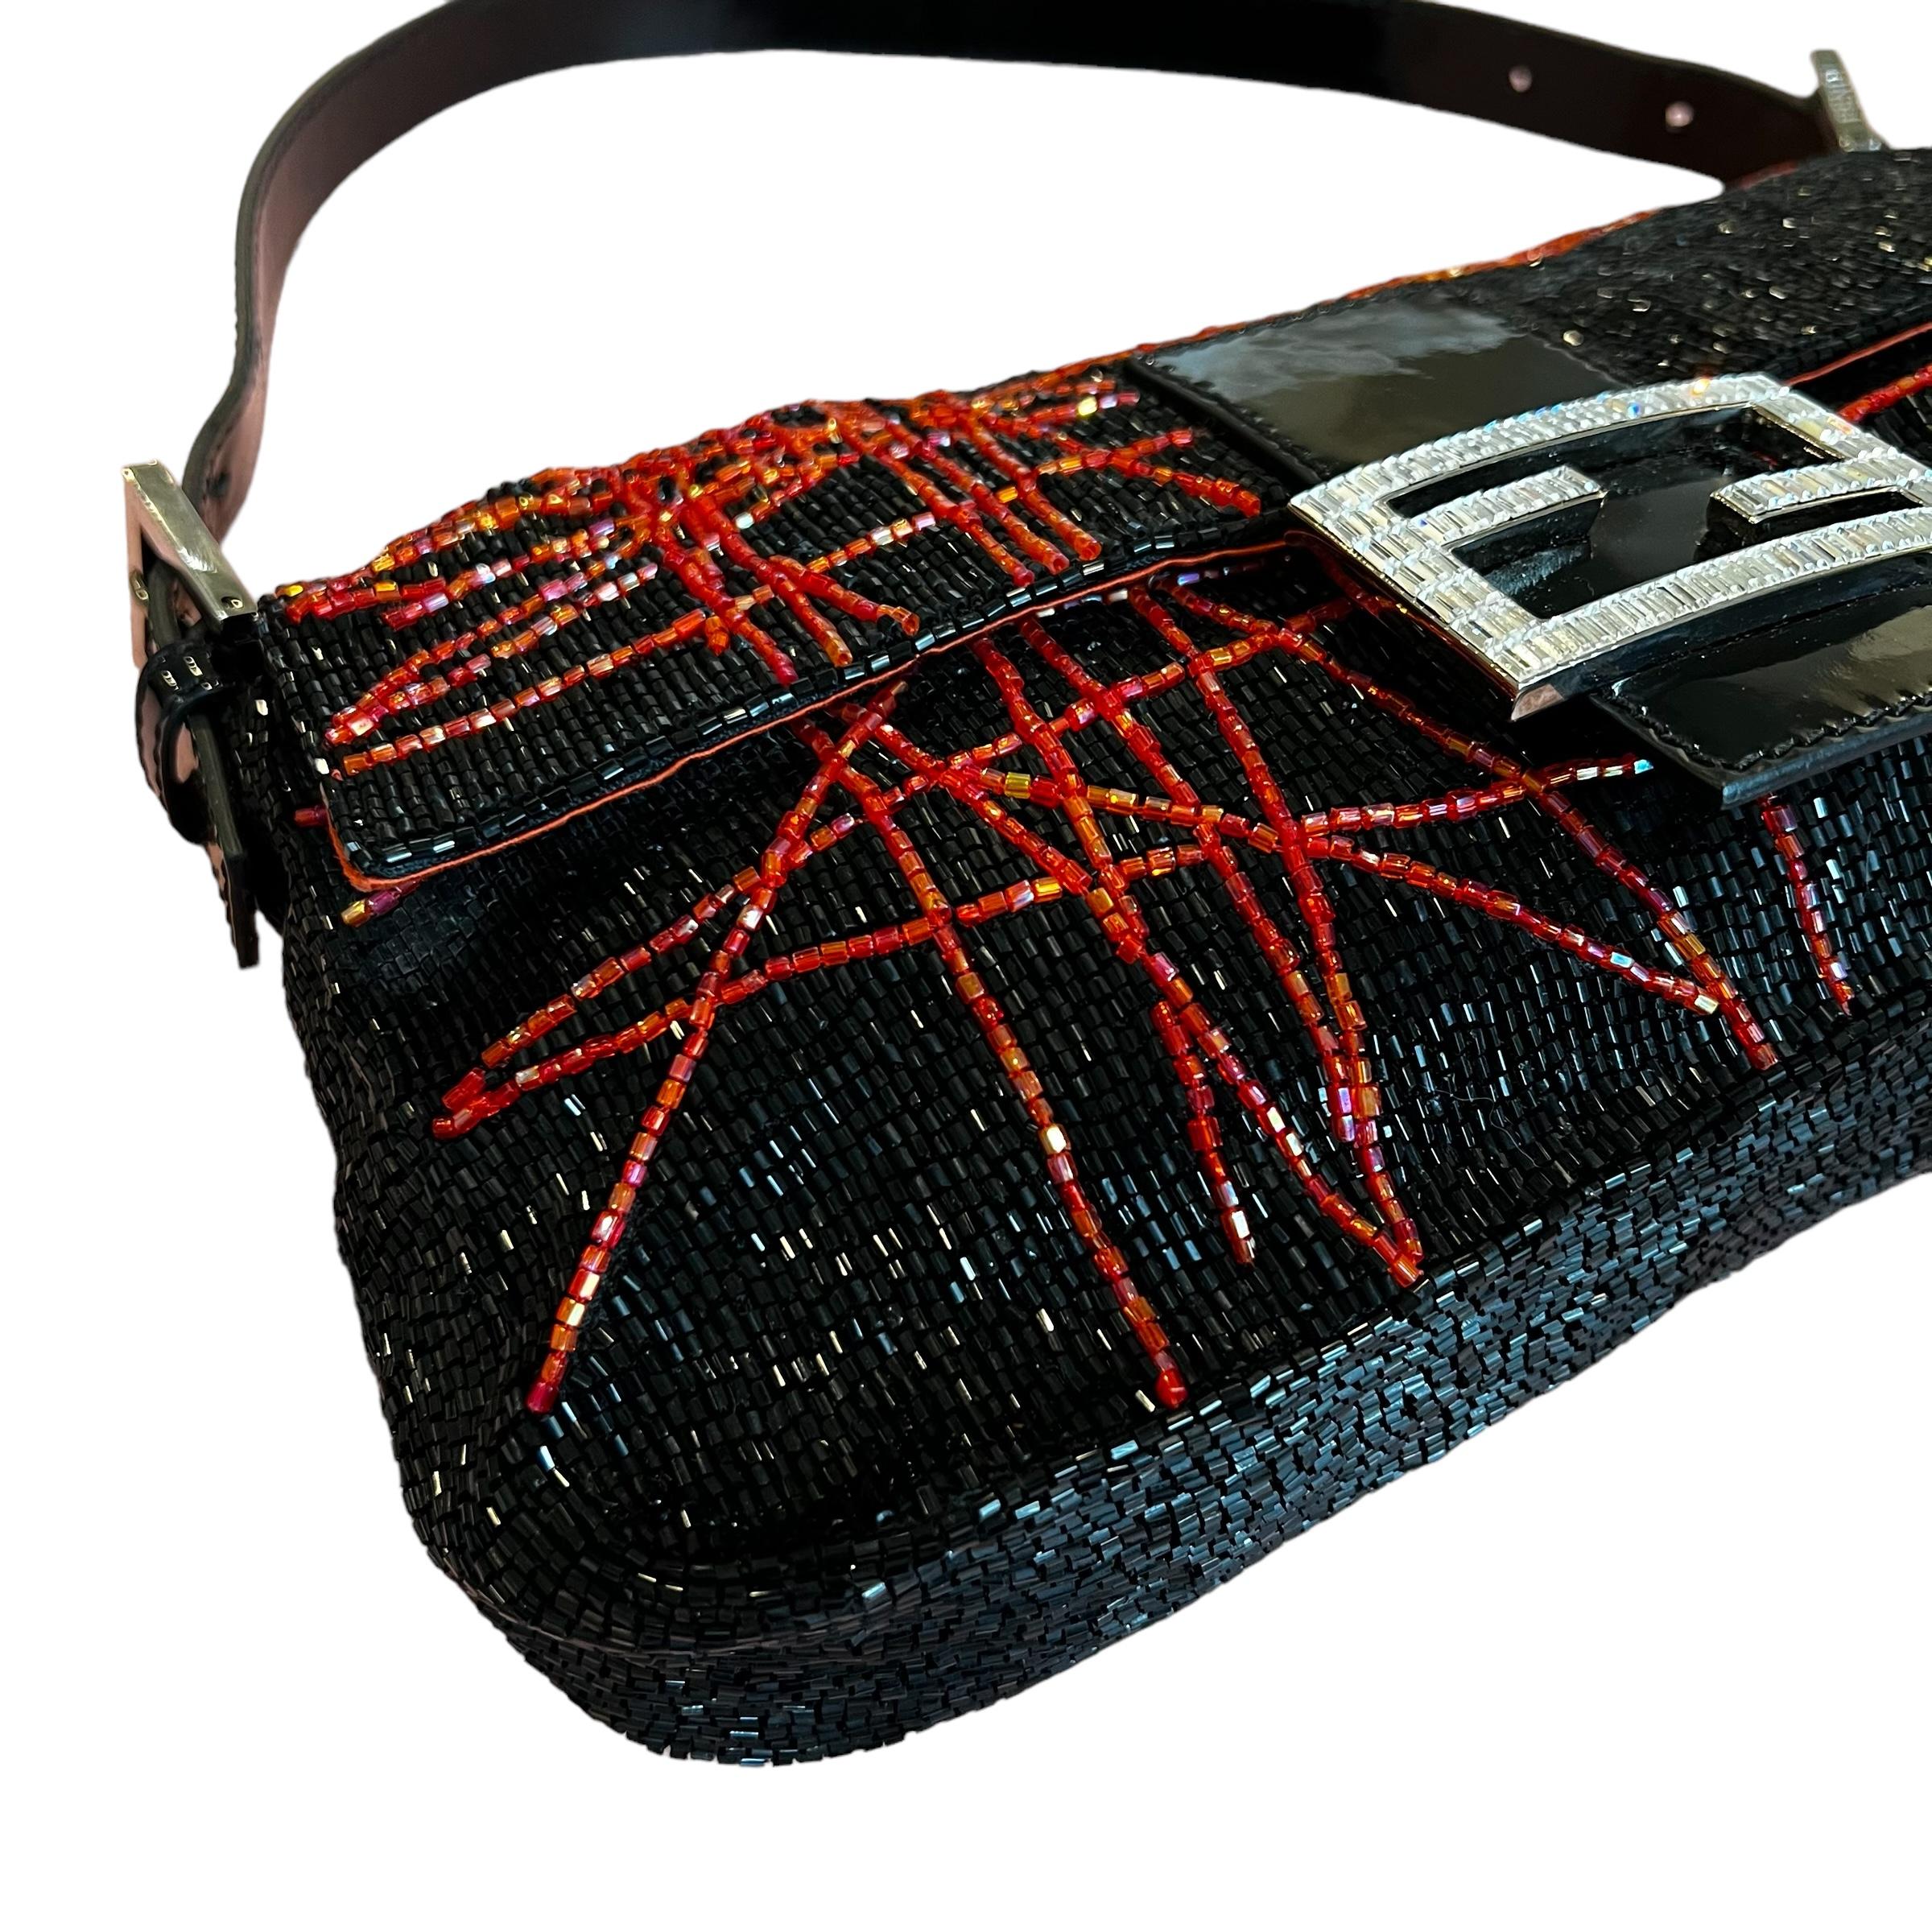 Rare Beaded Fendi Baguette Bag With Patent Leather & Swarovski Crystals For Sale 3